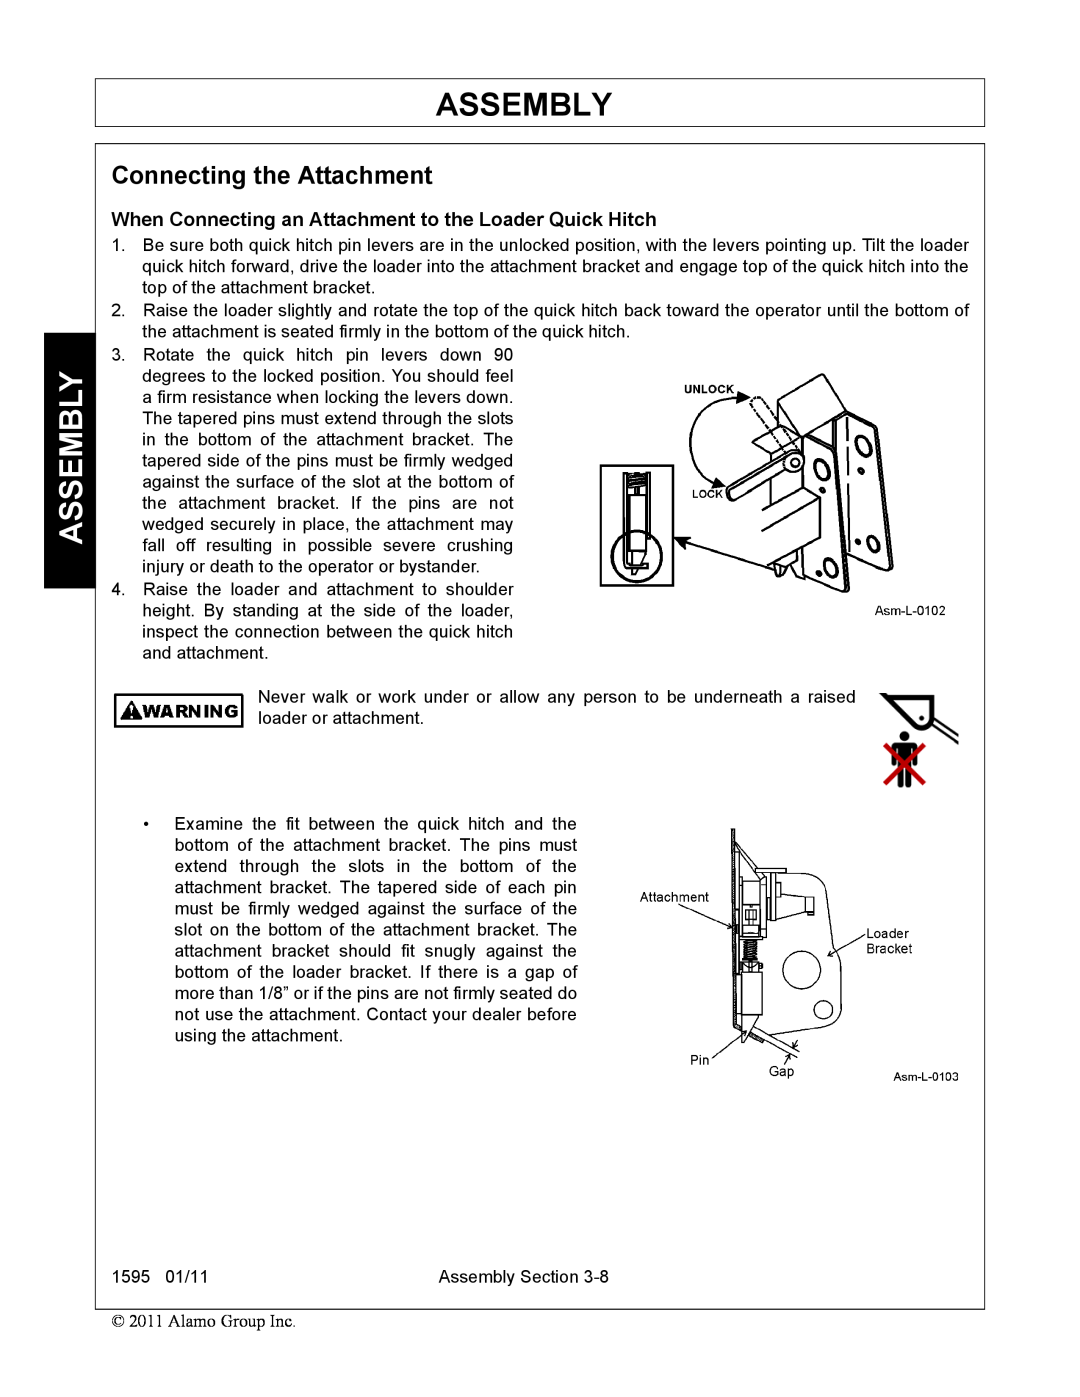 Alamo 1595 manual Assembly, Connecting the Attachment, When Connecting an Attachment to the Loader Quick Hitch 